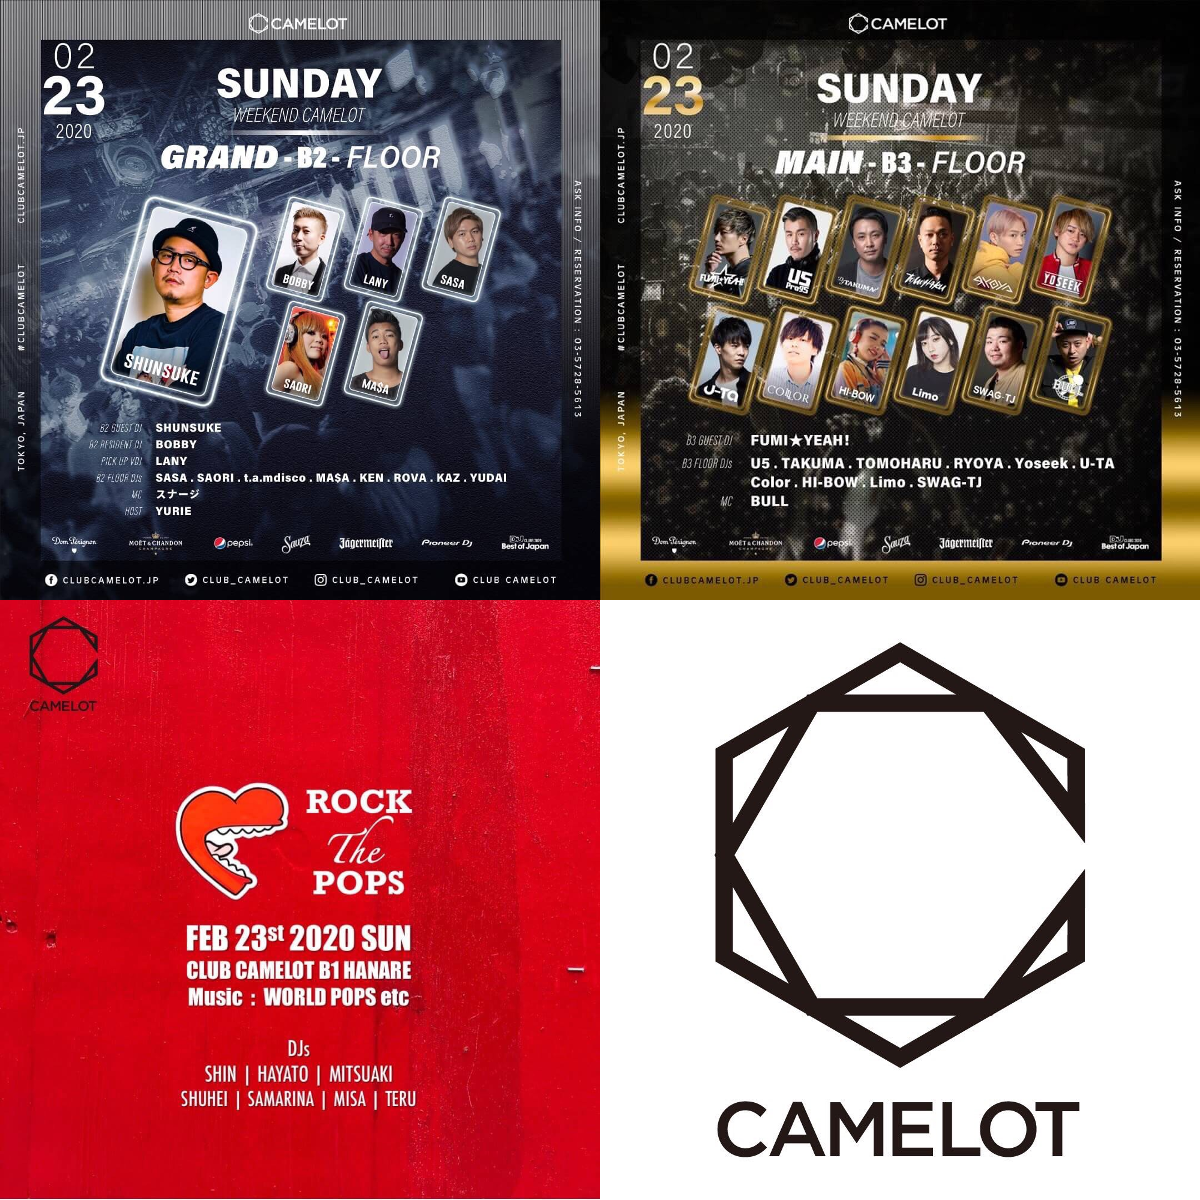 WEEKEND CAMELOT SUNDAY SP